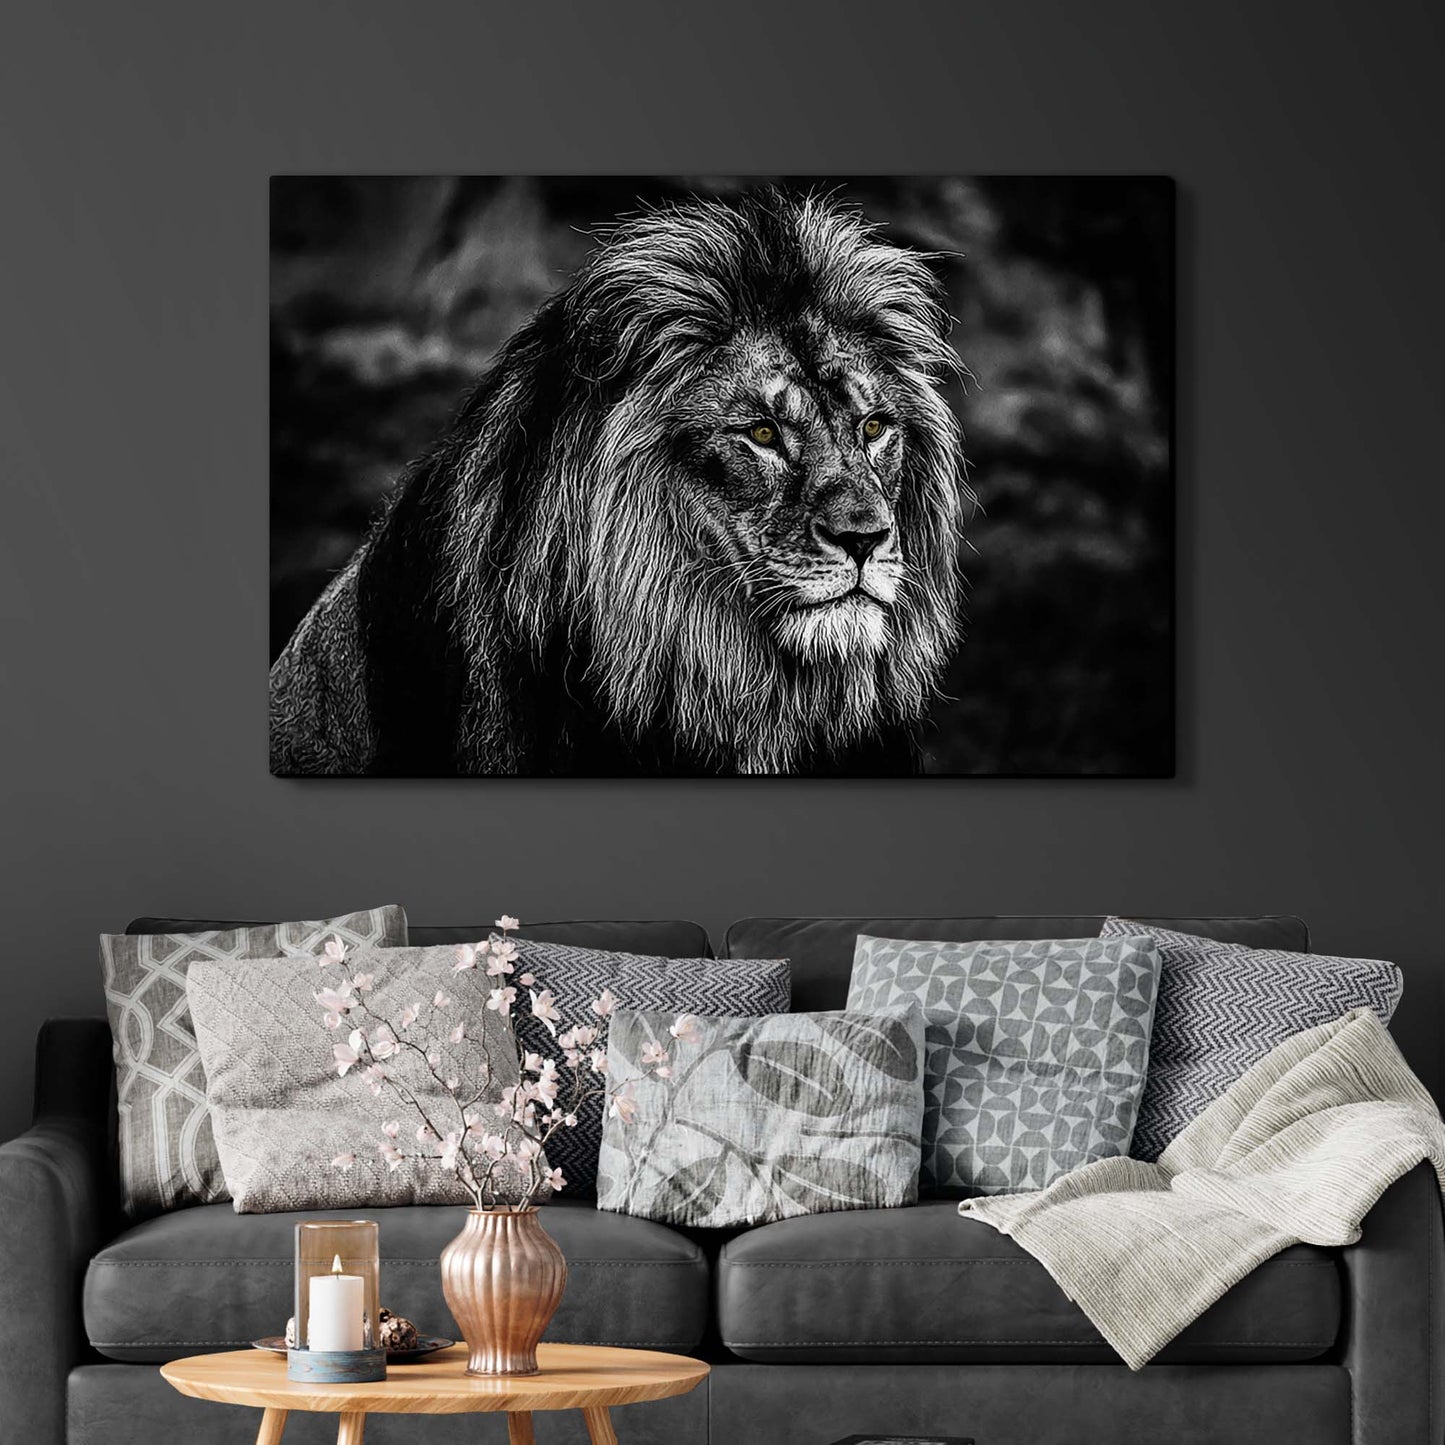 Black and White Golden-Eyed Lion Canvas Wall Art - Image by Tailored Canvases